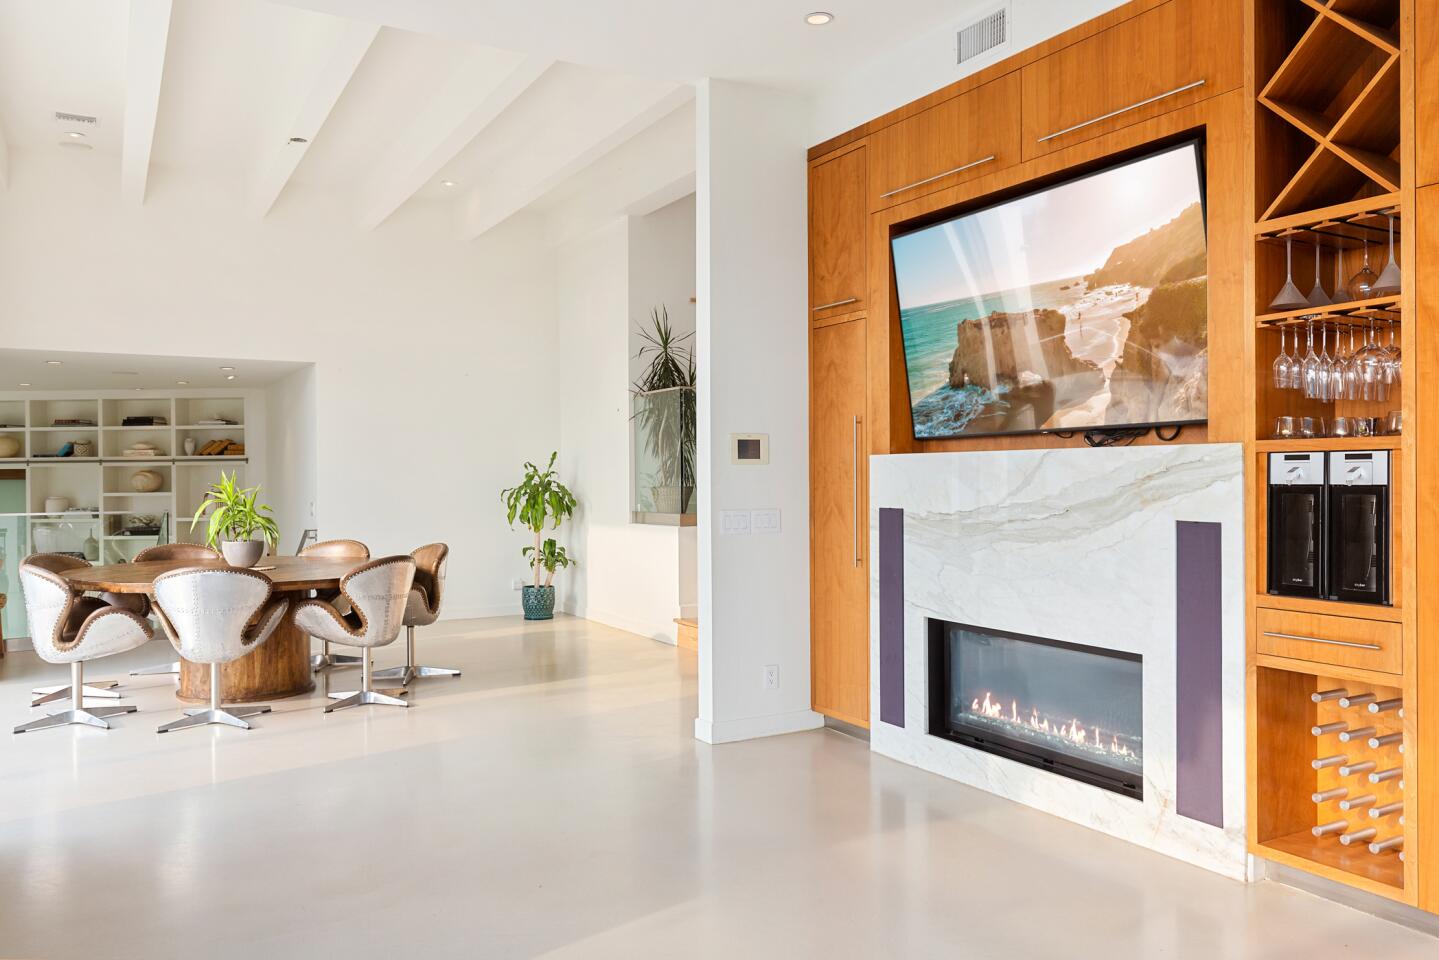 High ceilings, a polished concrete floor and a marble fireplace with built in minibar.